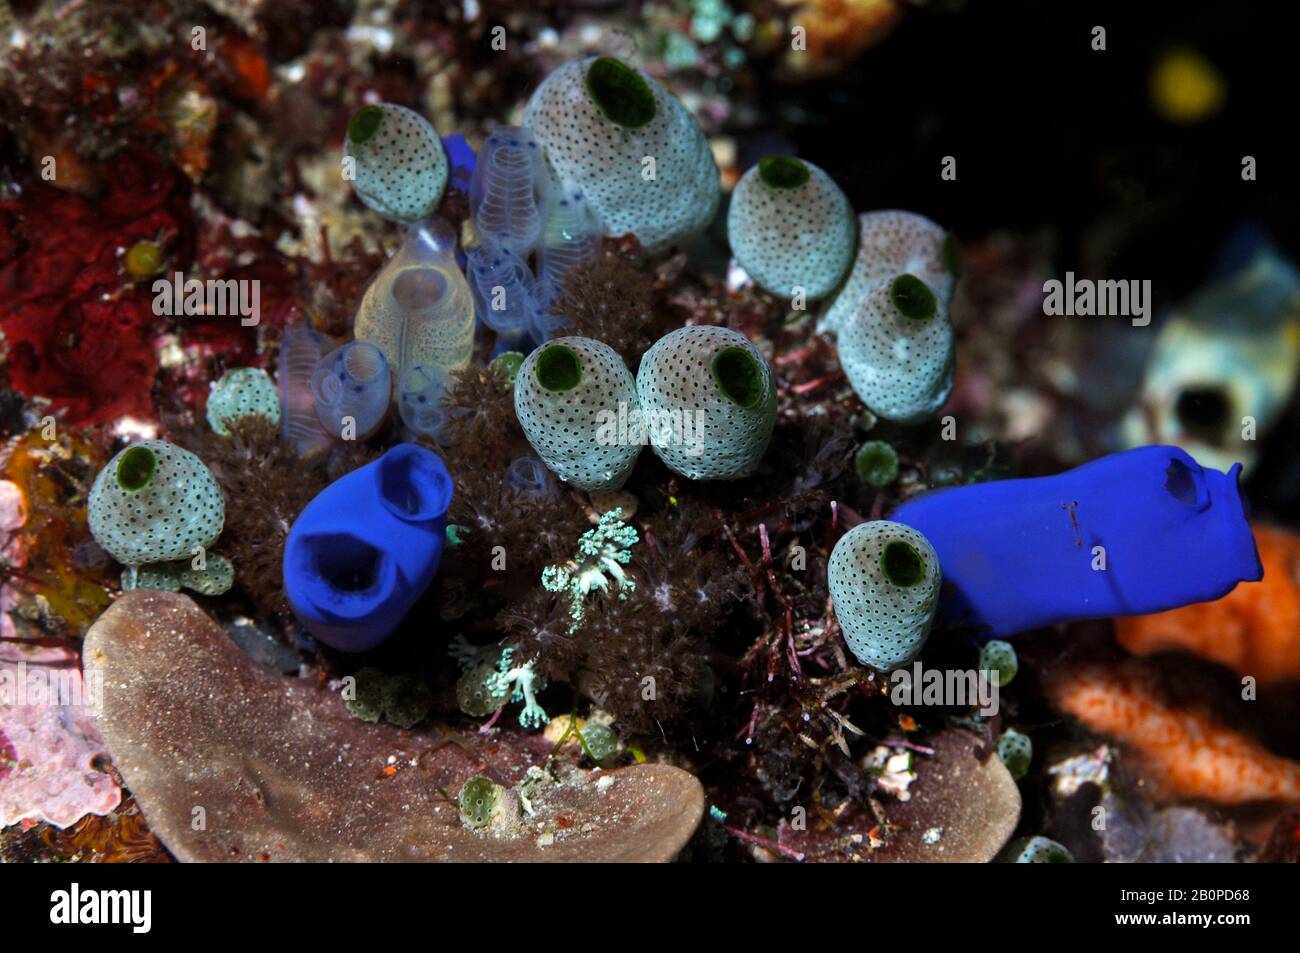 Ascidians in a reef, Didemnum molle, Rhopalaea sp. and Clavelina moluccensis, Komodo National Park, Indonesia Stock Photo